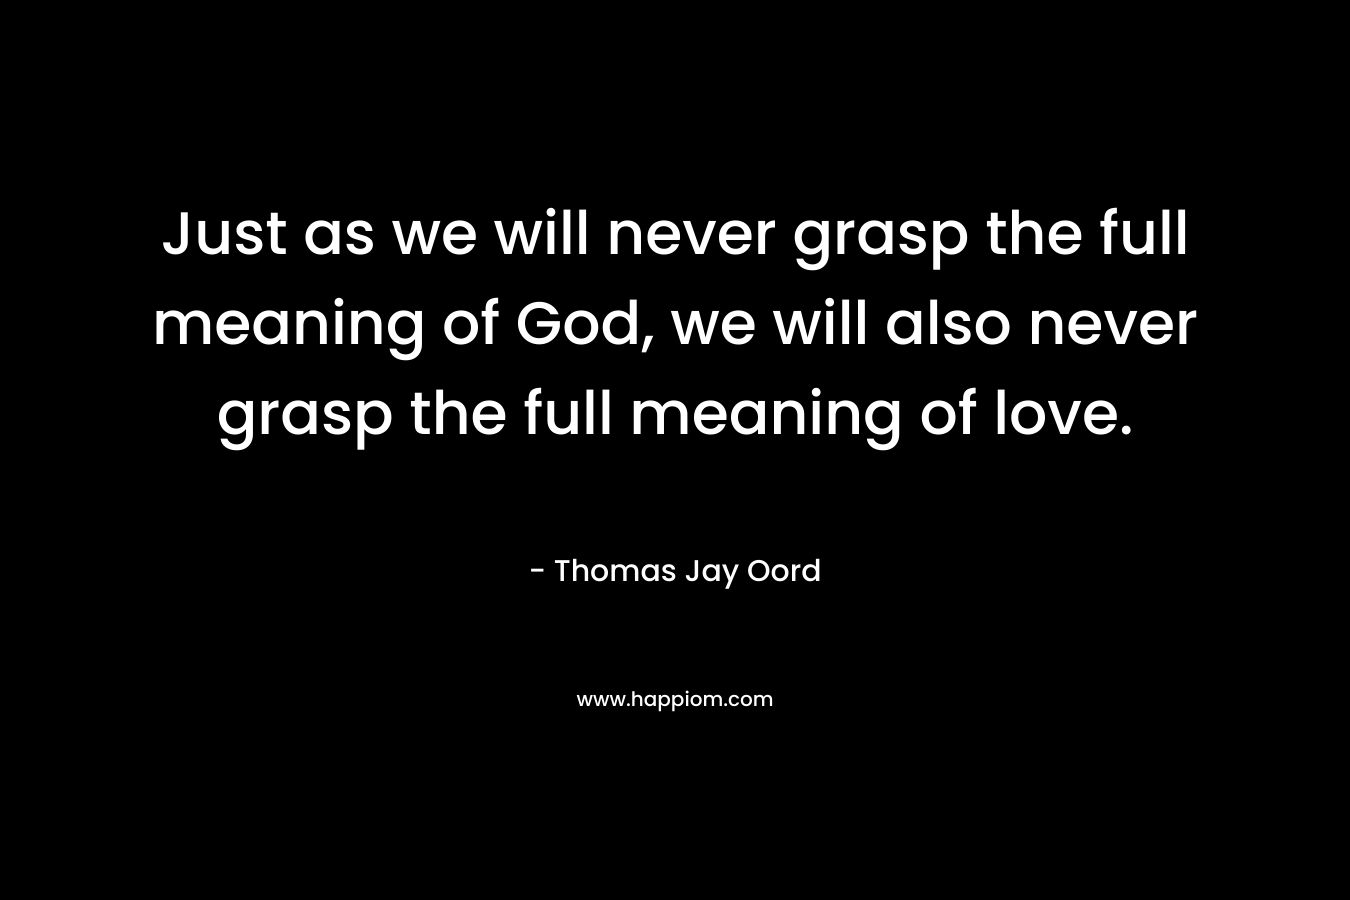 Just as we will never grasp the full meaning of God, we will also never grasp the full meaning of love.